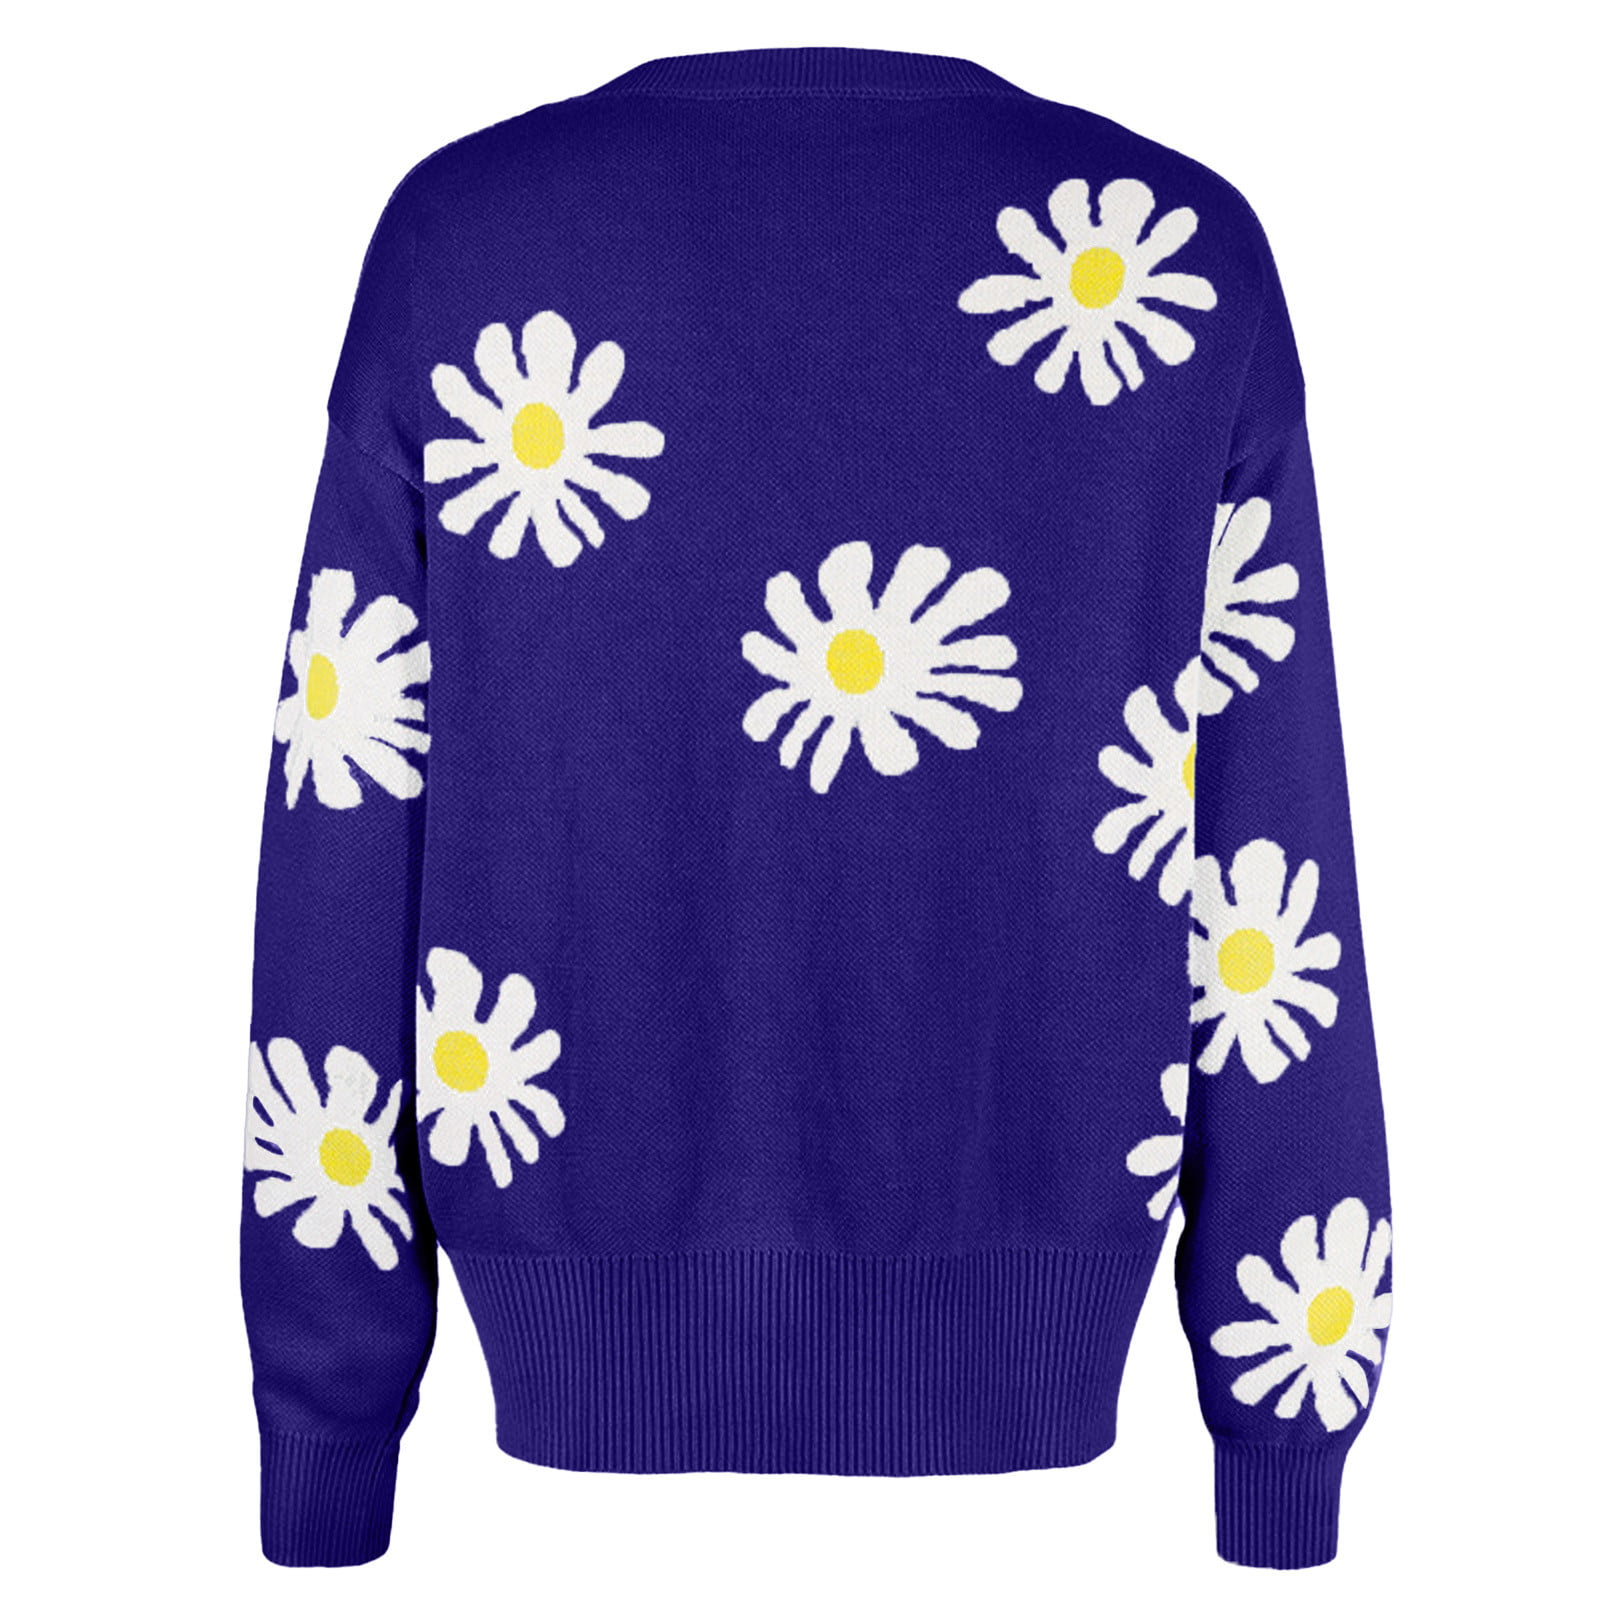 ZQGJB Cute Daisy Flower Printed Cardigan Sweaters for Women Aesthetic  Classic Fit Button Down Open Front Jacquard Knitted Sweater Plus Size Tops  Blue